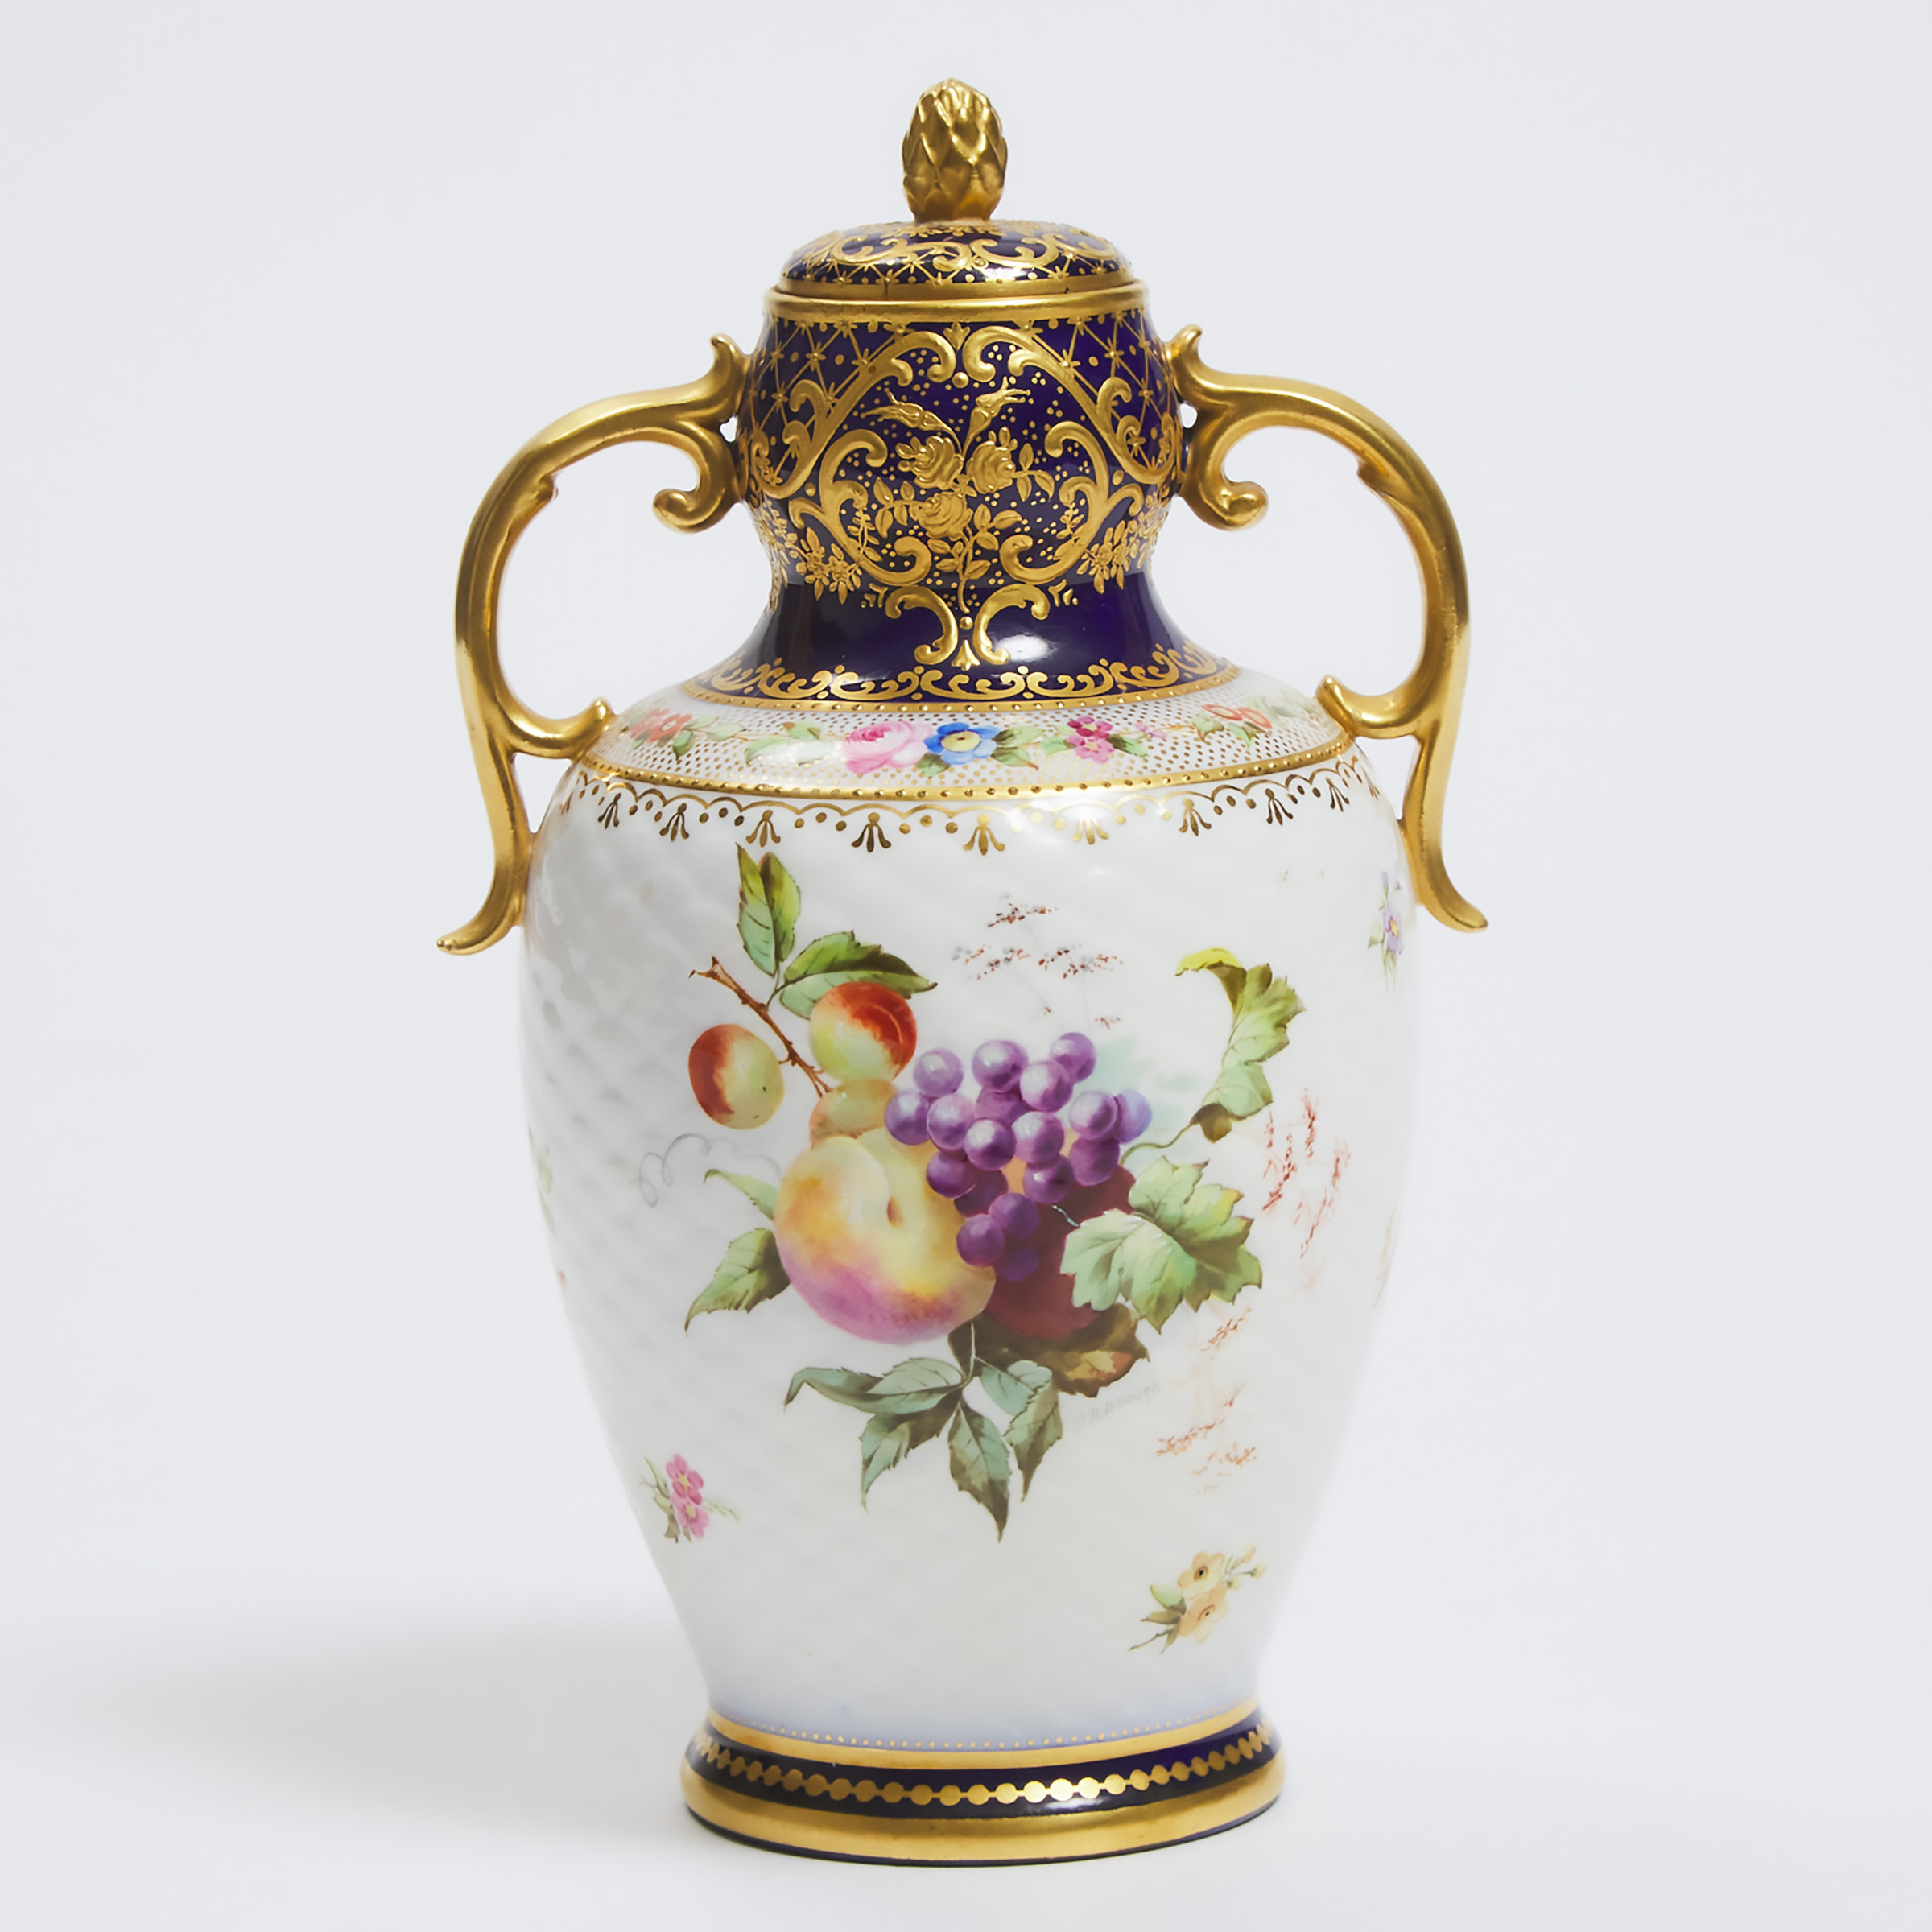 Copeland Fruit and Floral Painted Two-Handled Vase and Cover, Charles Brough, late 19th century